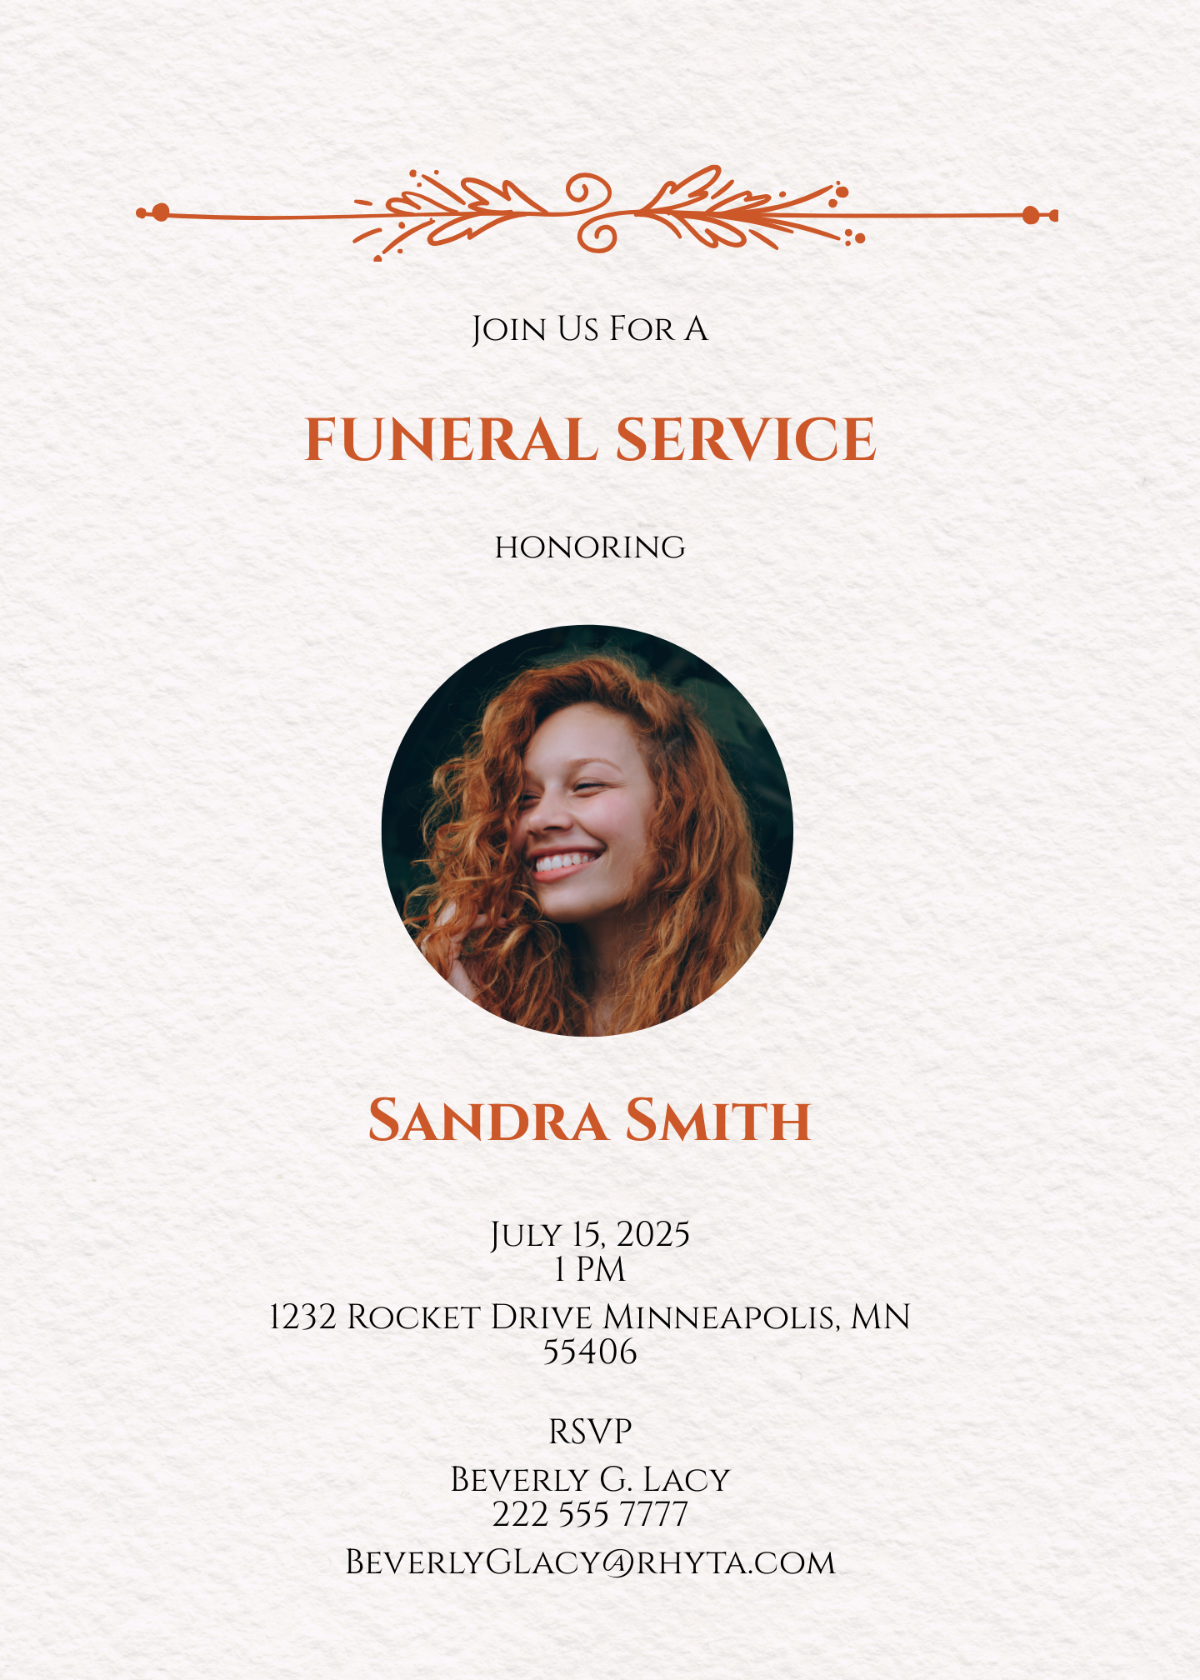 Sample Email Funeral Invitation